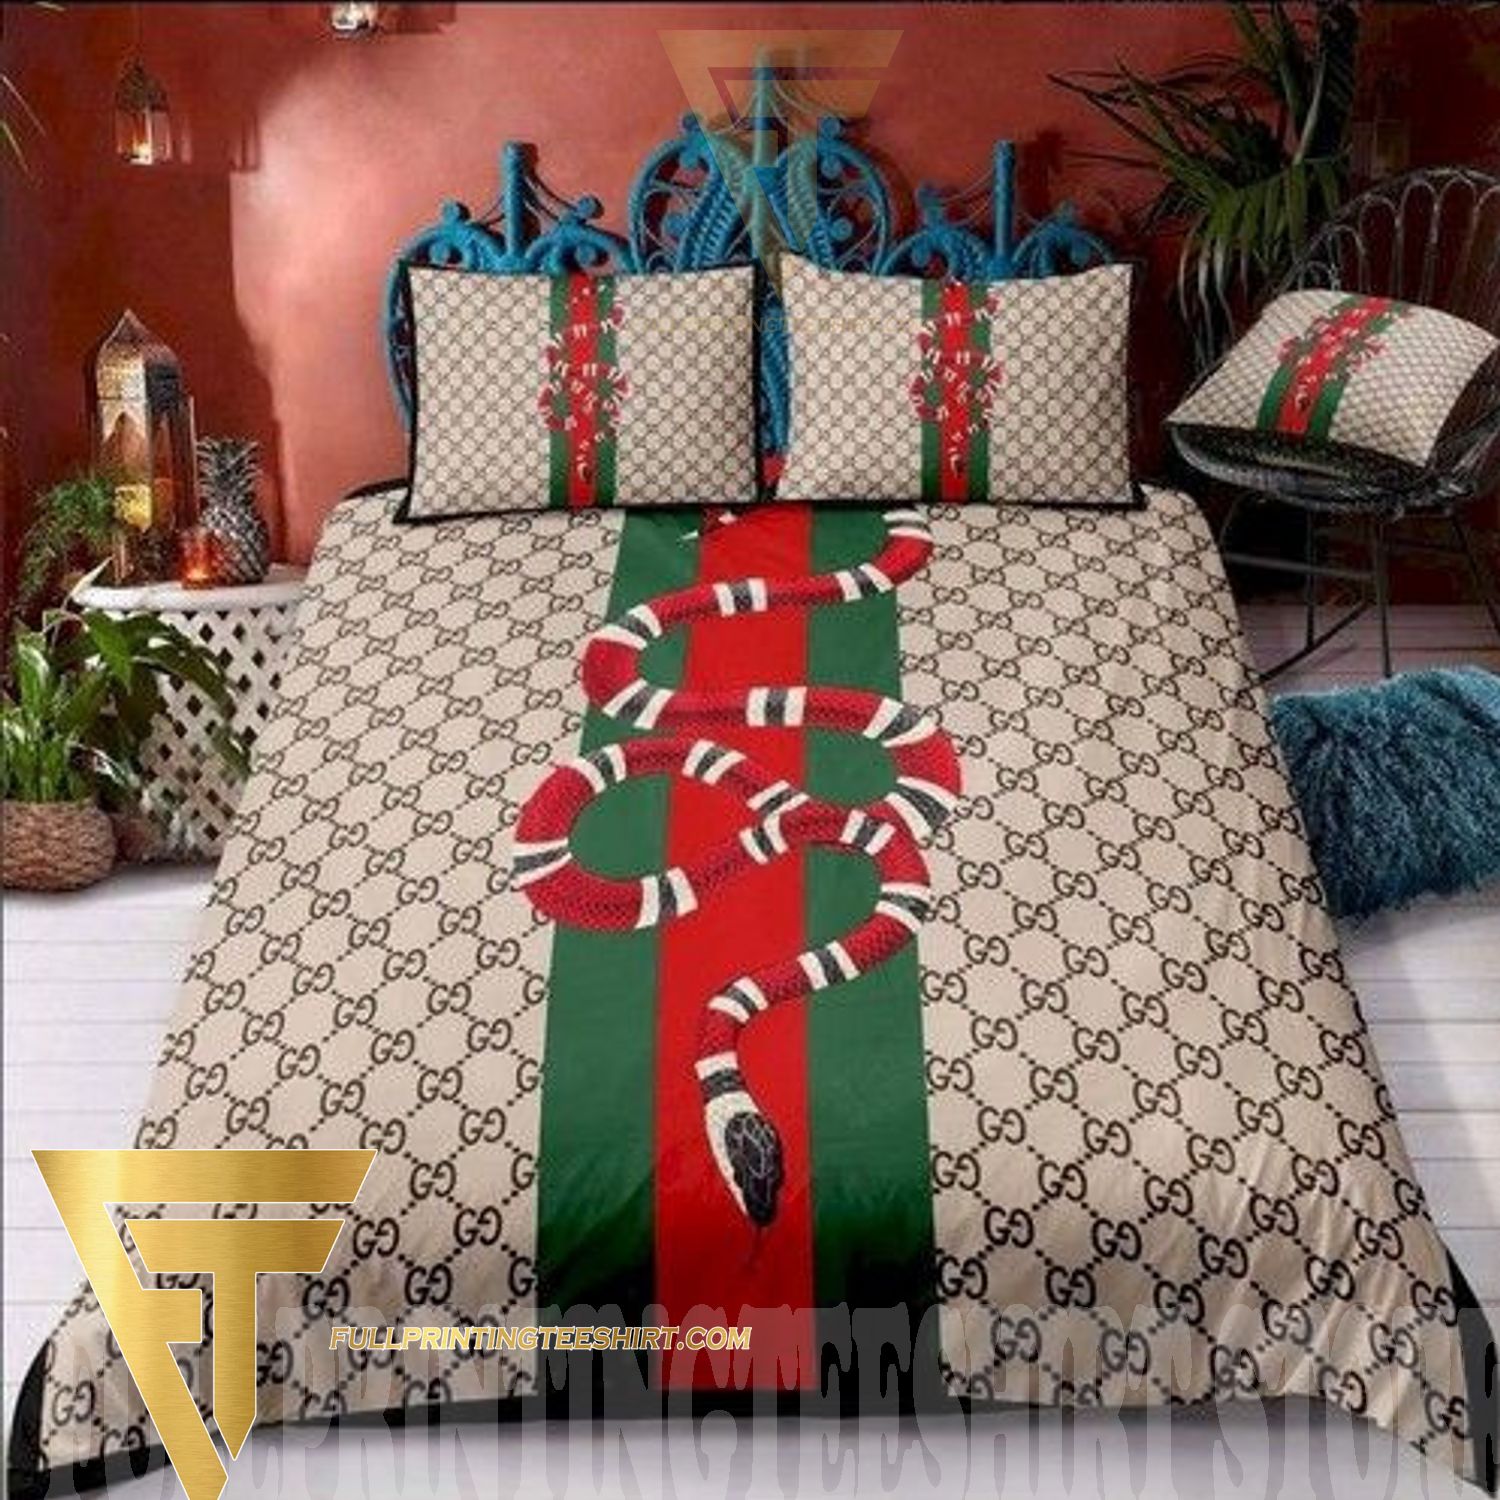 Top-selling item] Gucci 12 Bedding Sets Bedroom Luxury Brand Bedding